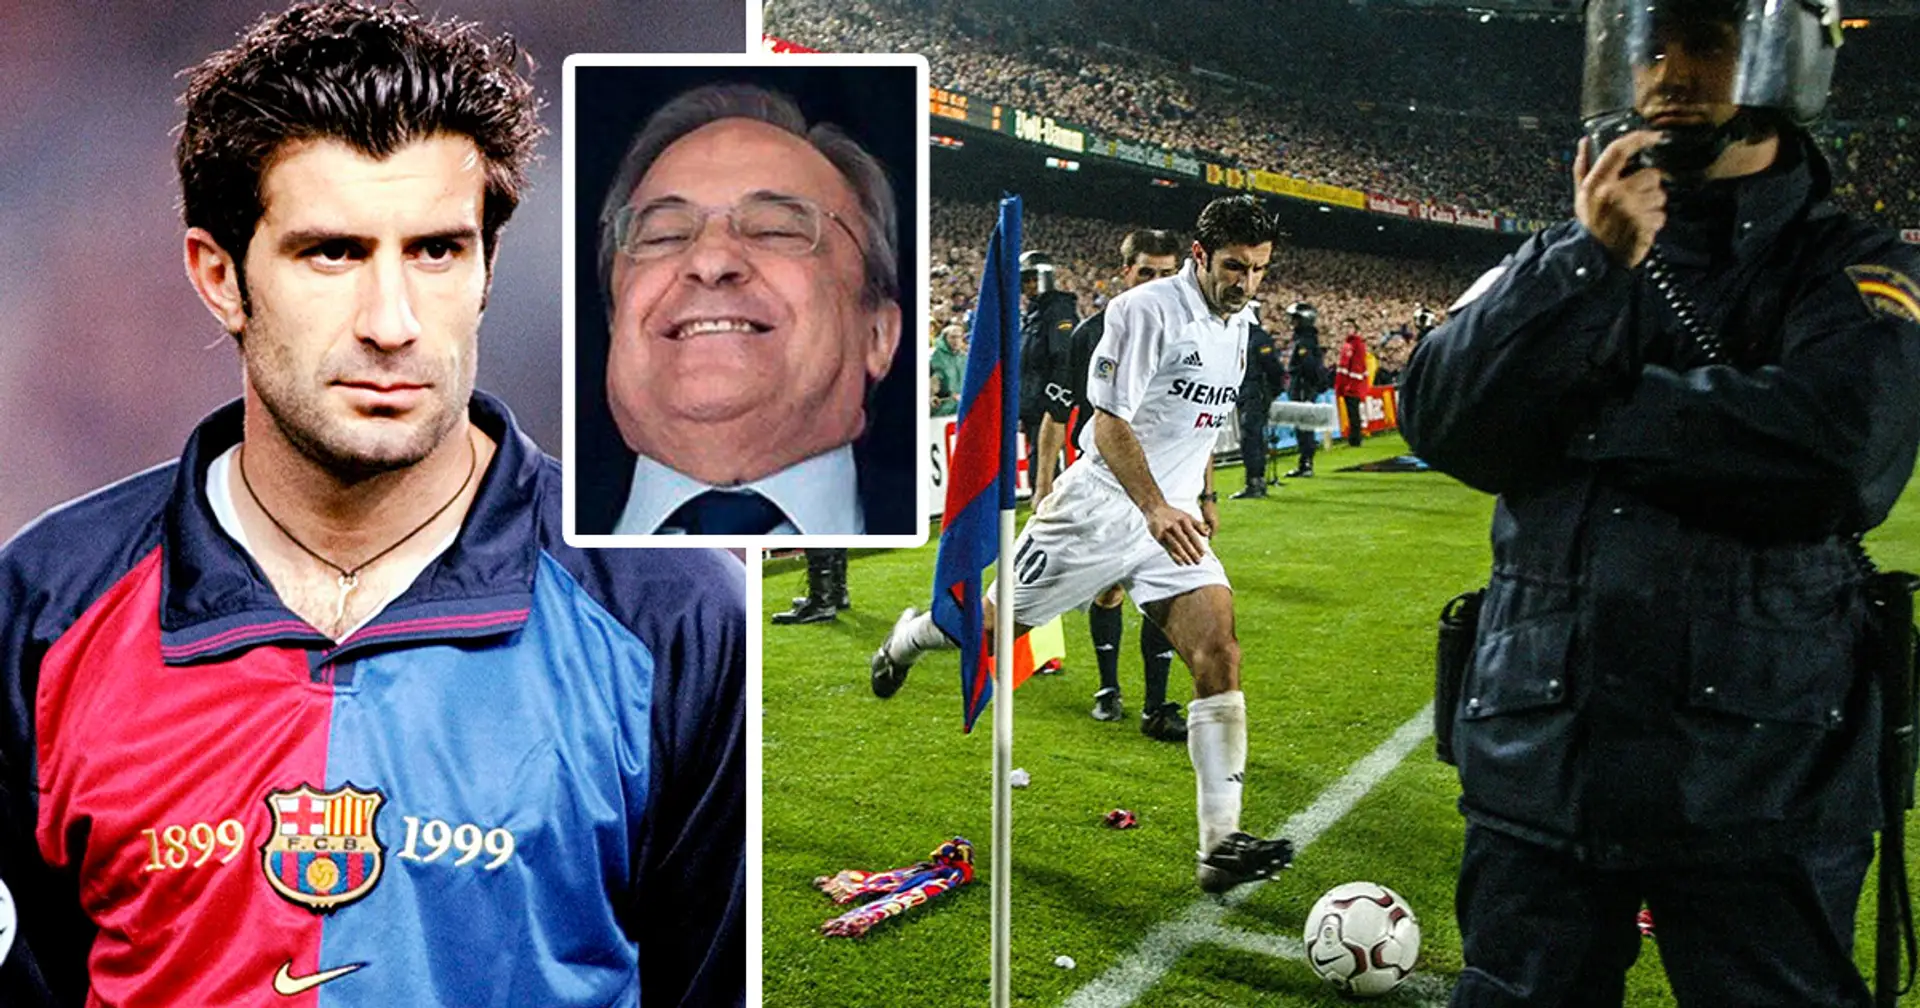 The inside story of why Luis Figo moved from Barcelona to Real Madrid